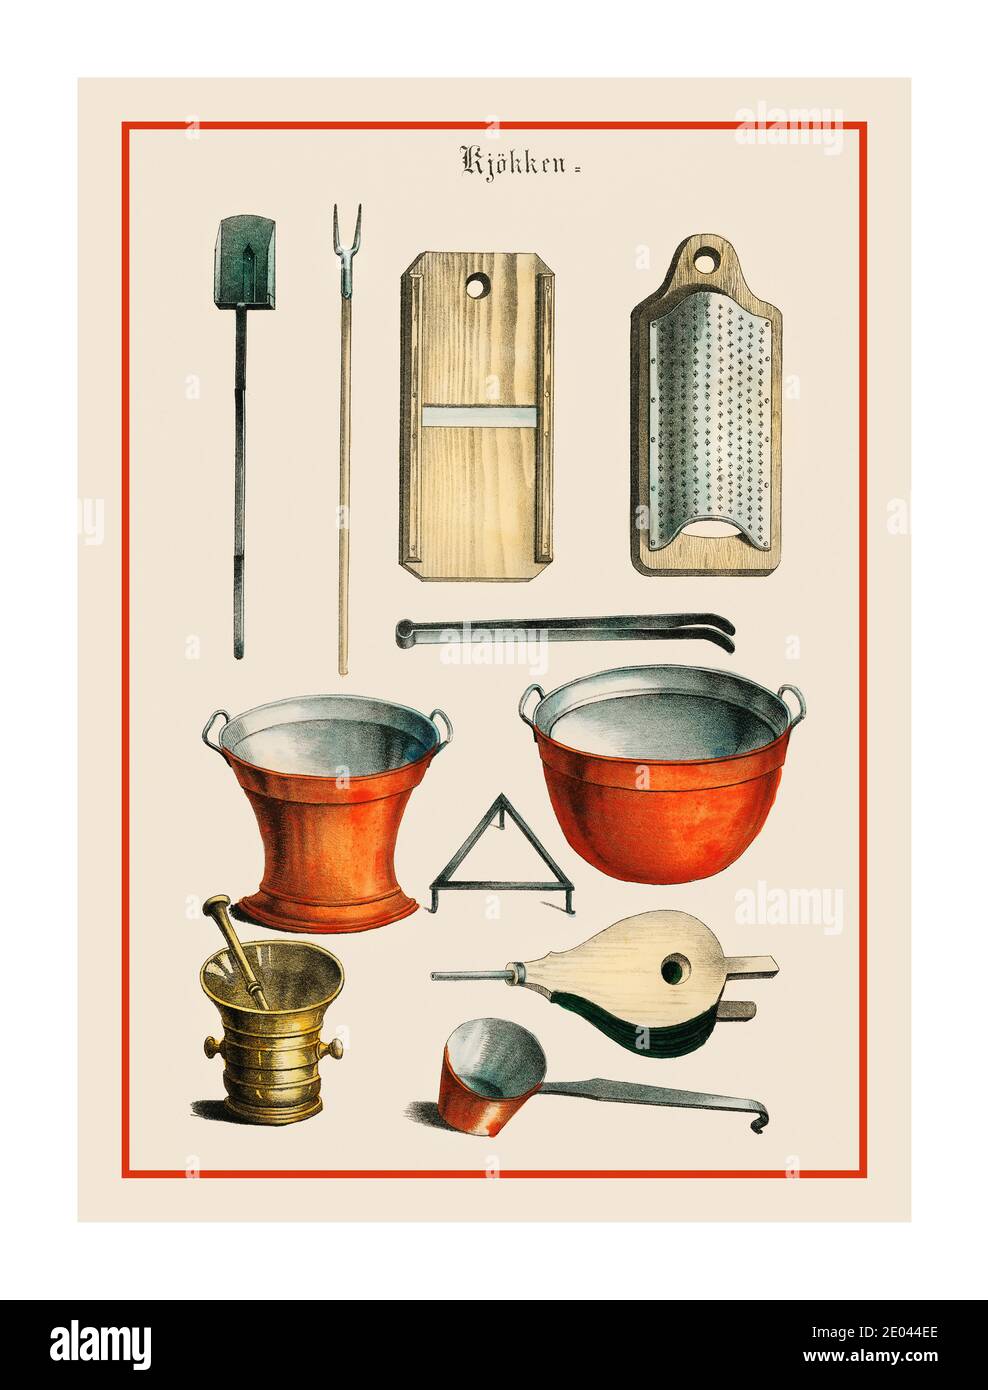 1800’s Kitchenware lithograph (1850) Denmark, a vintage collection of cooking utensils & kitchenware. Stock Photo